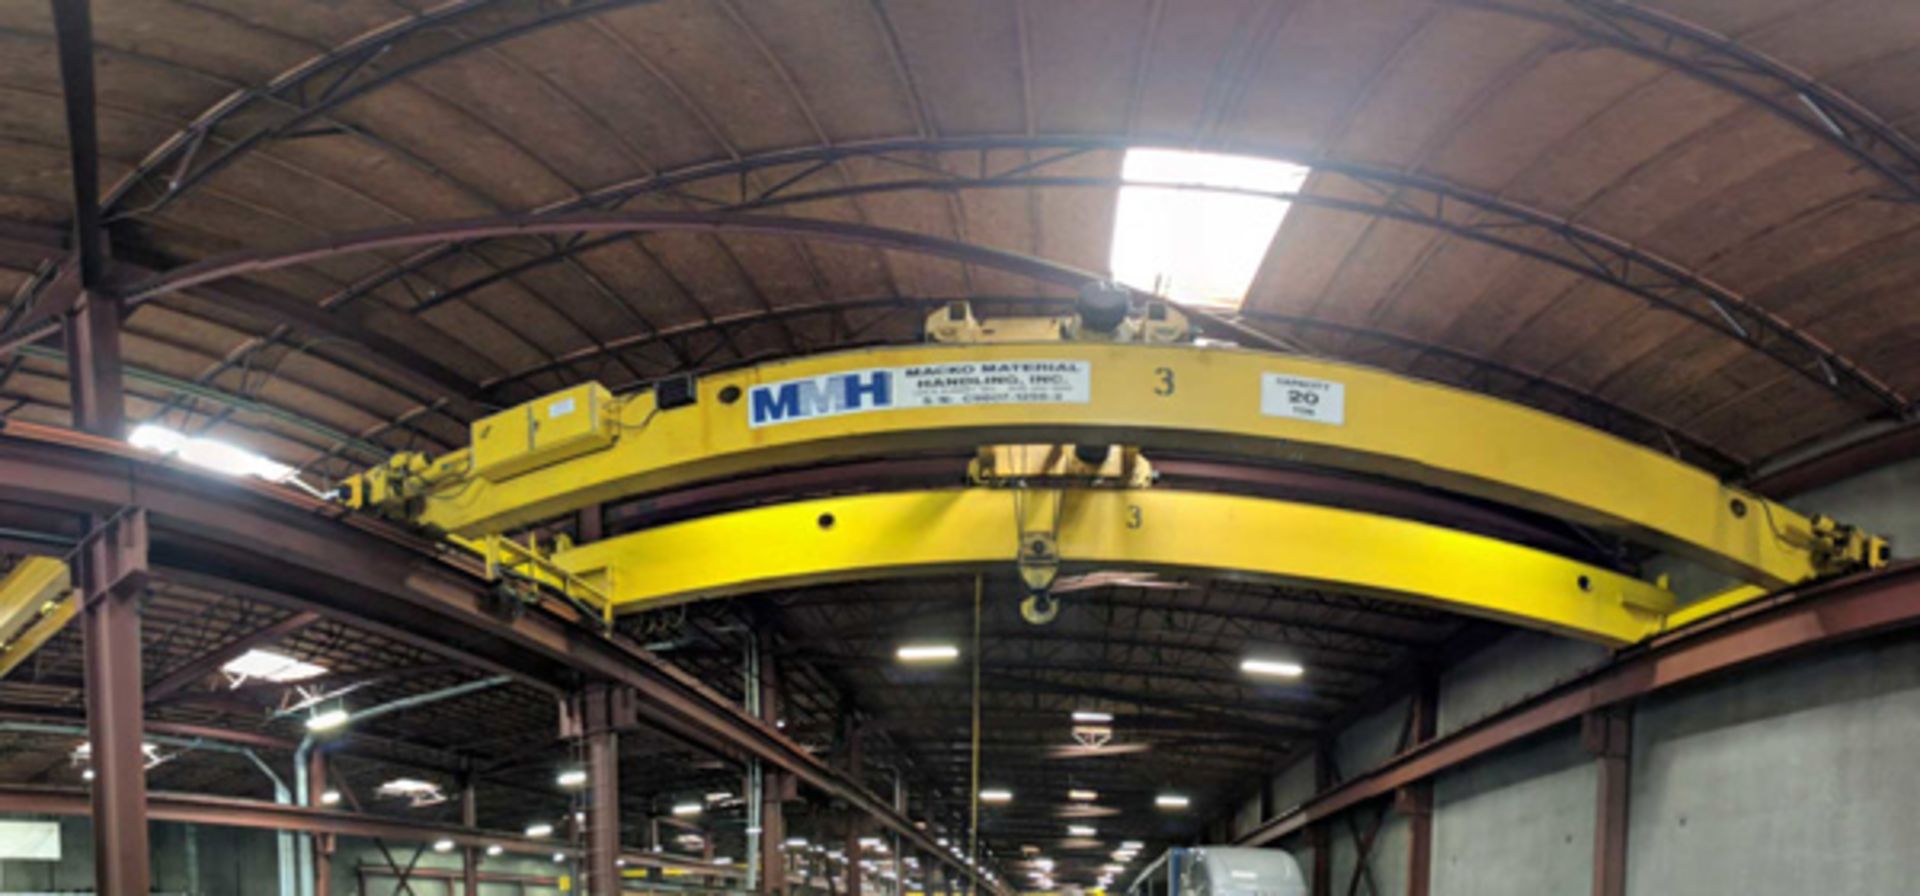 MMH Double Girder Top Running Bridge Crane on ground free loading | 20 Ton x 42', Located In: - Image 6 of 23